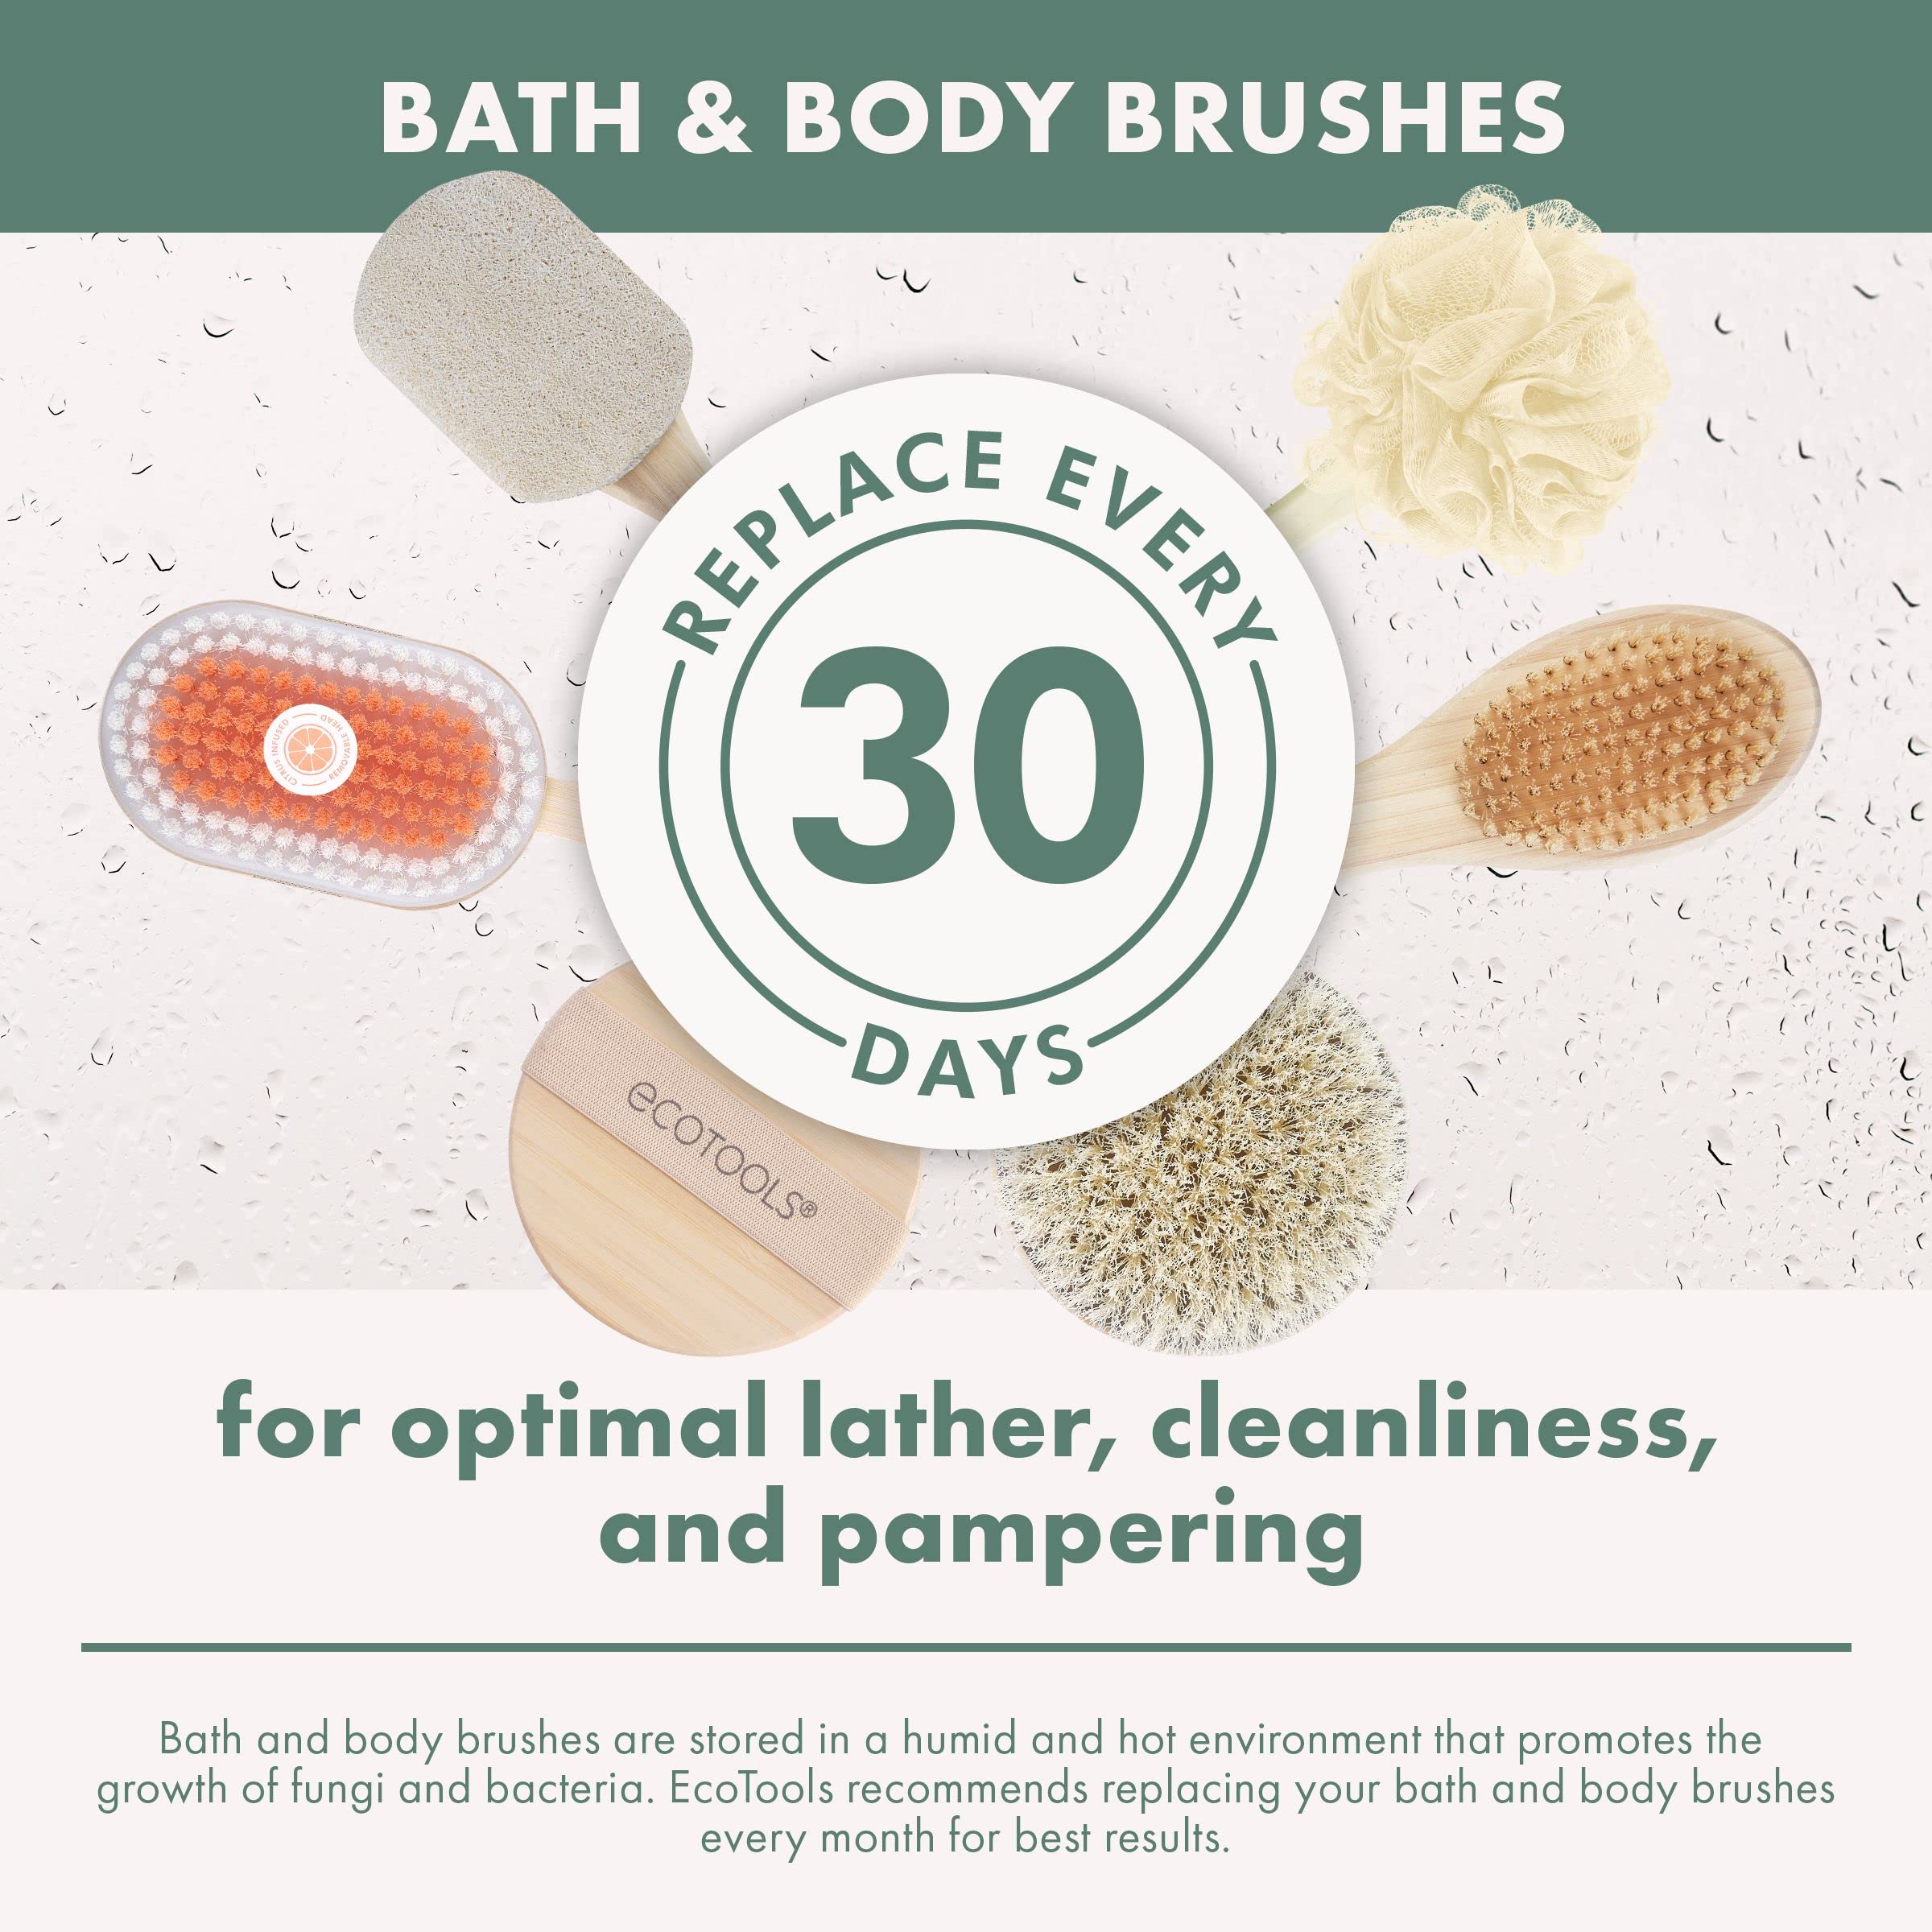 EcoTools Dry Body Brush, For Post Shower & Bath Skincare Routine, Removes Dirt & Promotes Blood Circulation, Helps Reduce Appearance of Cellulite, Eco-Friendly, Vegan & Cruelty-Free, 1 Count